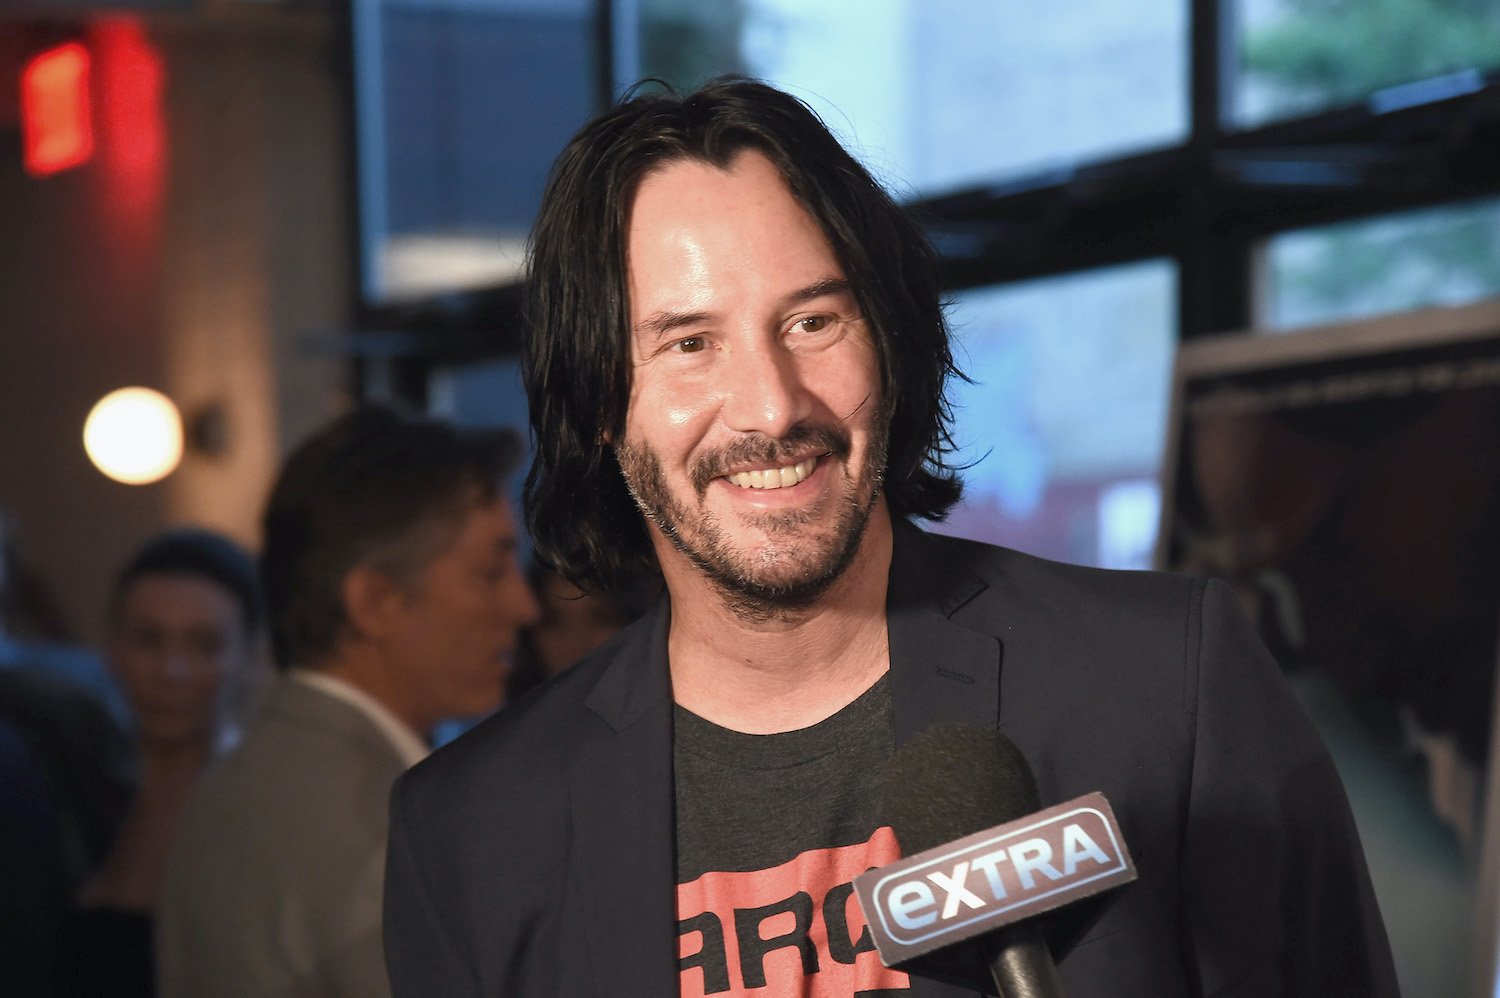 Keanu Reeves attends the 'Siberia' New York premiere in 2018 